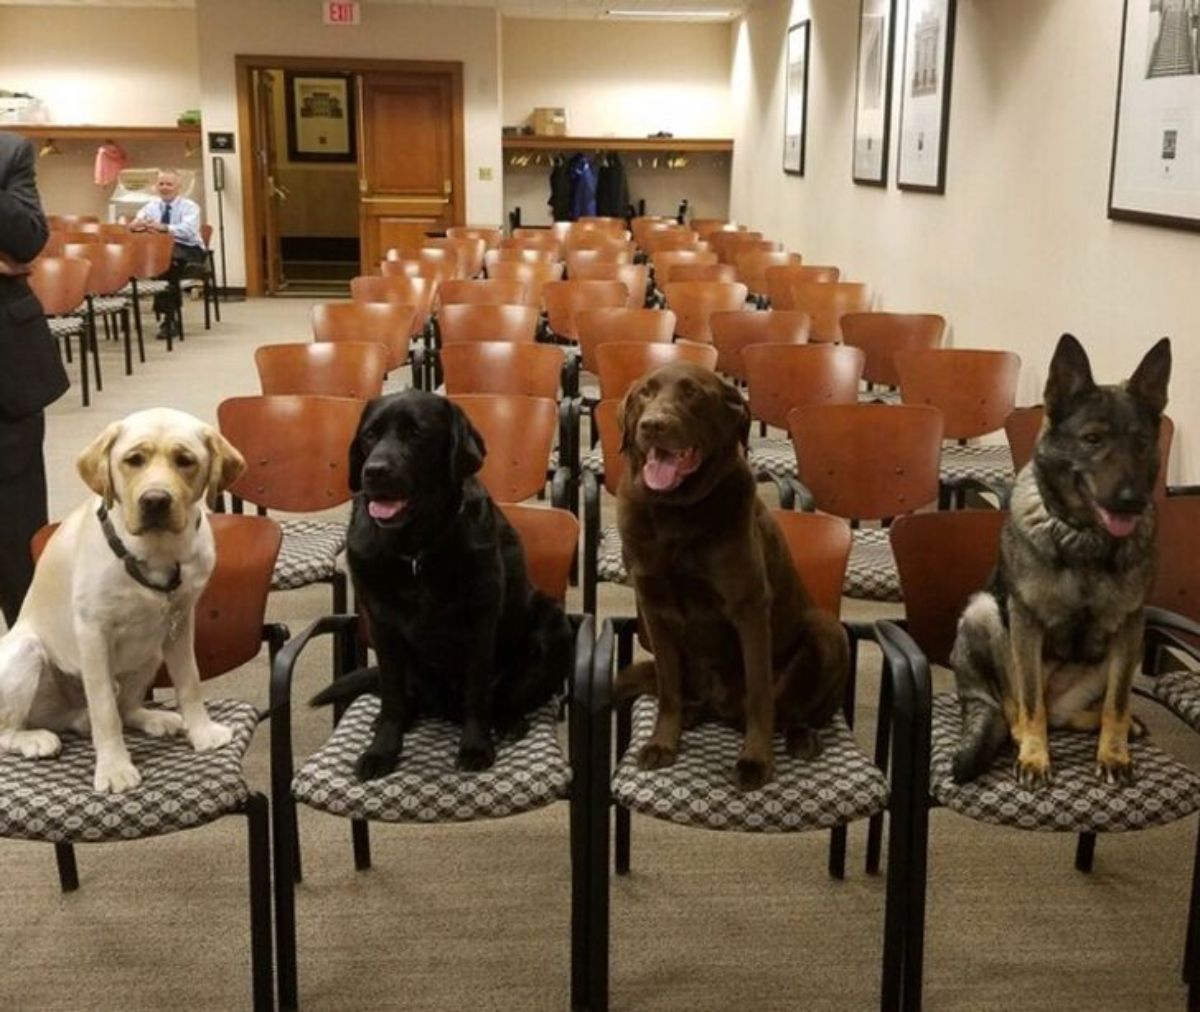 a yellow labrador, a black labrador, a chocolate labrador and a german shepherd are sitting on chairs in a room filled with brown chairs